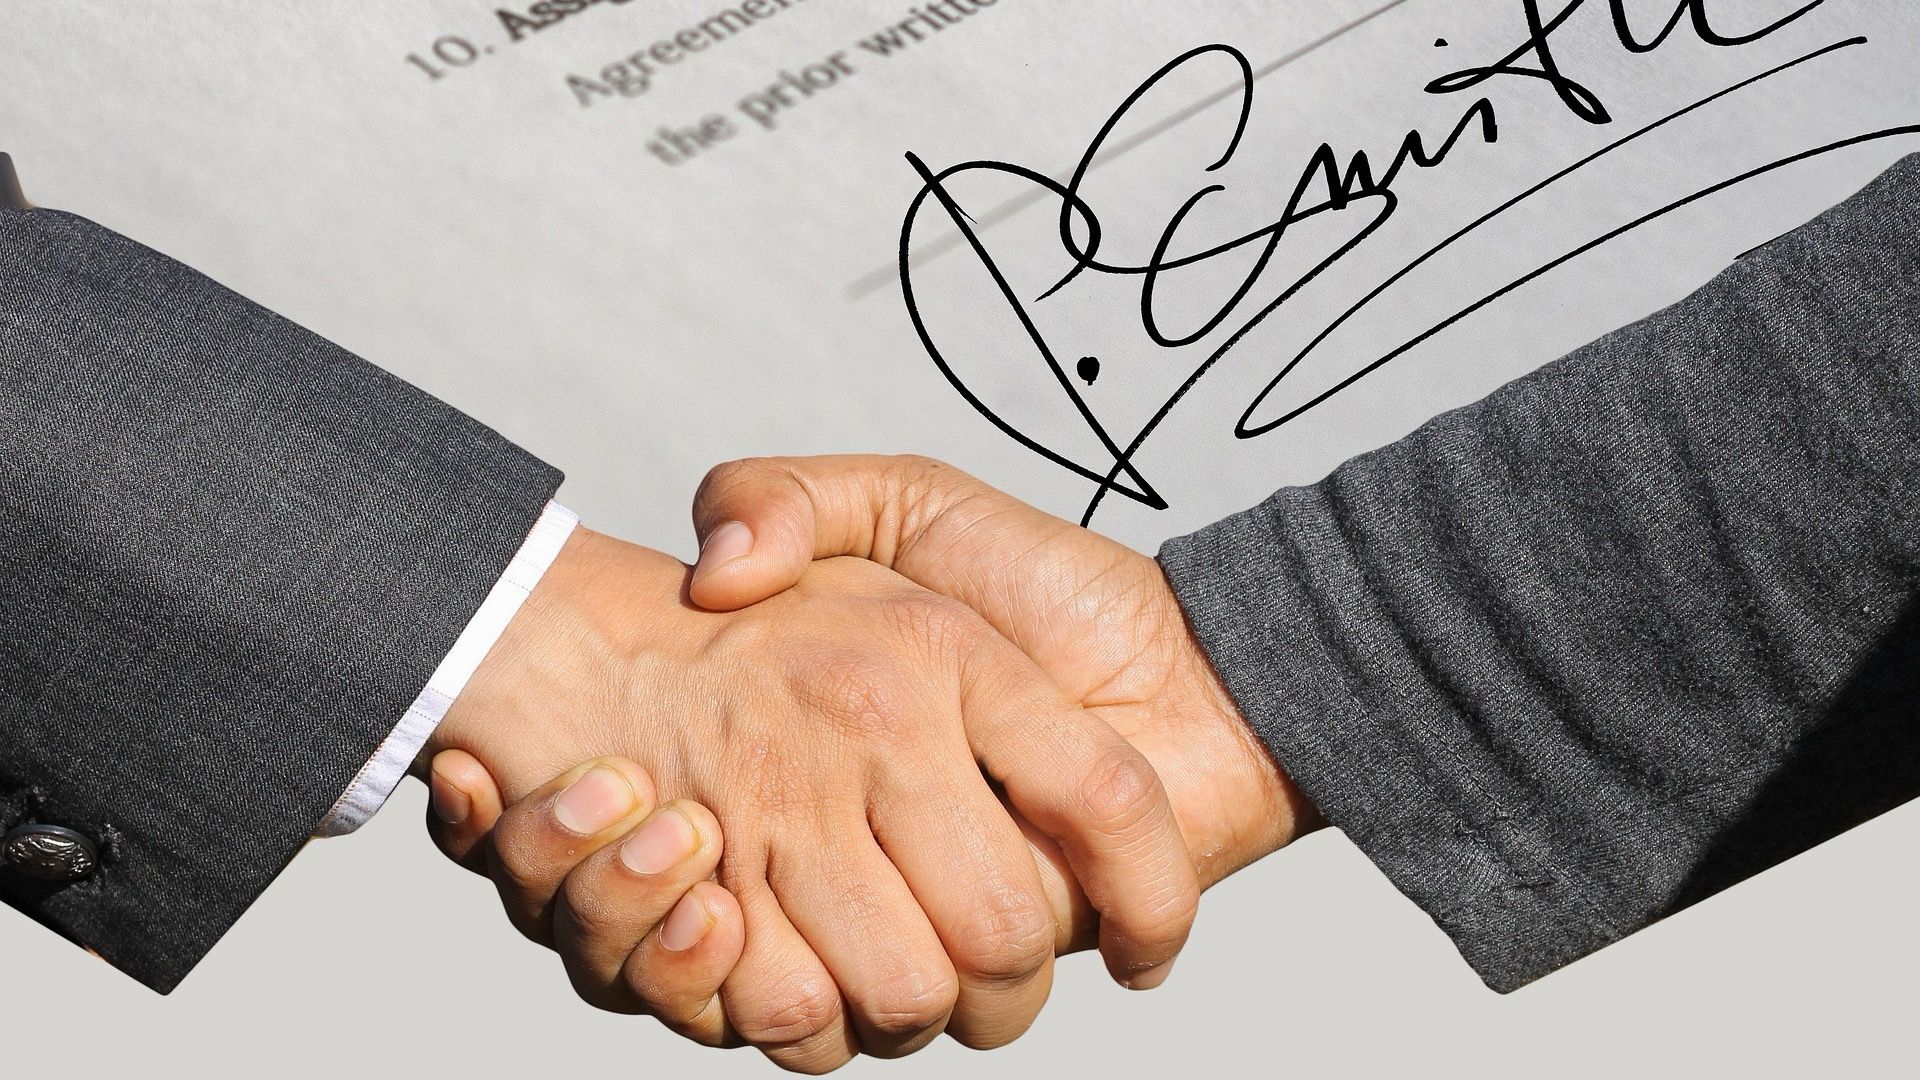 free document signing apps for Android and iPhone